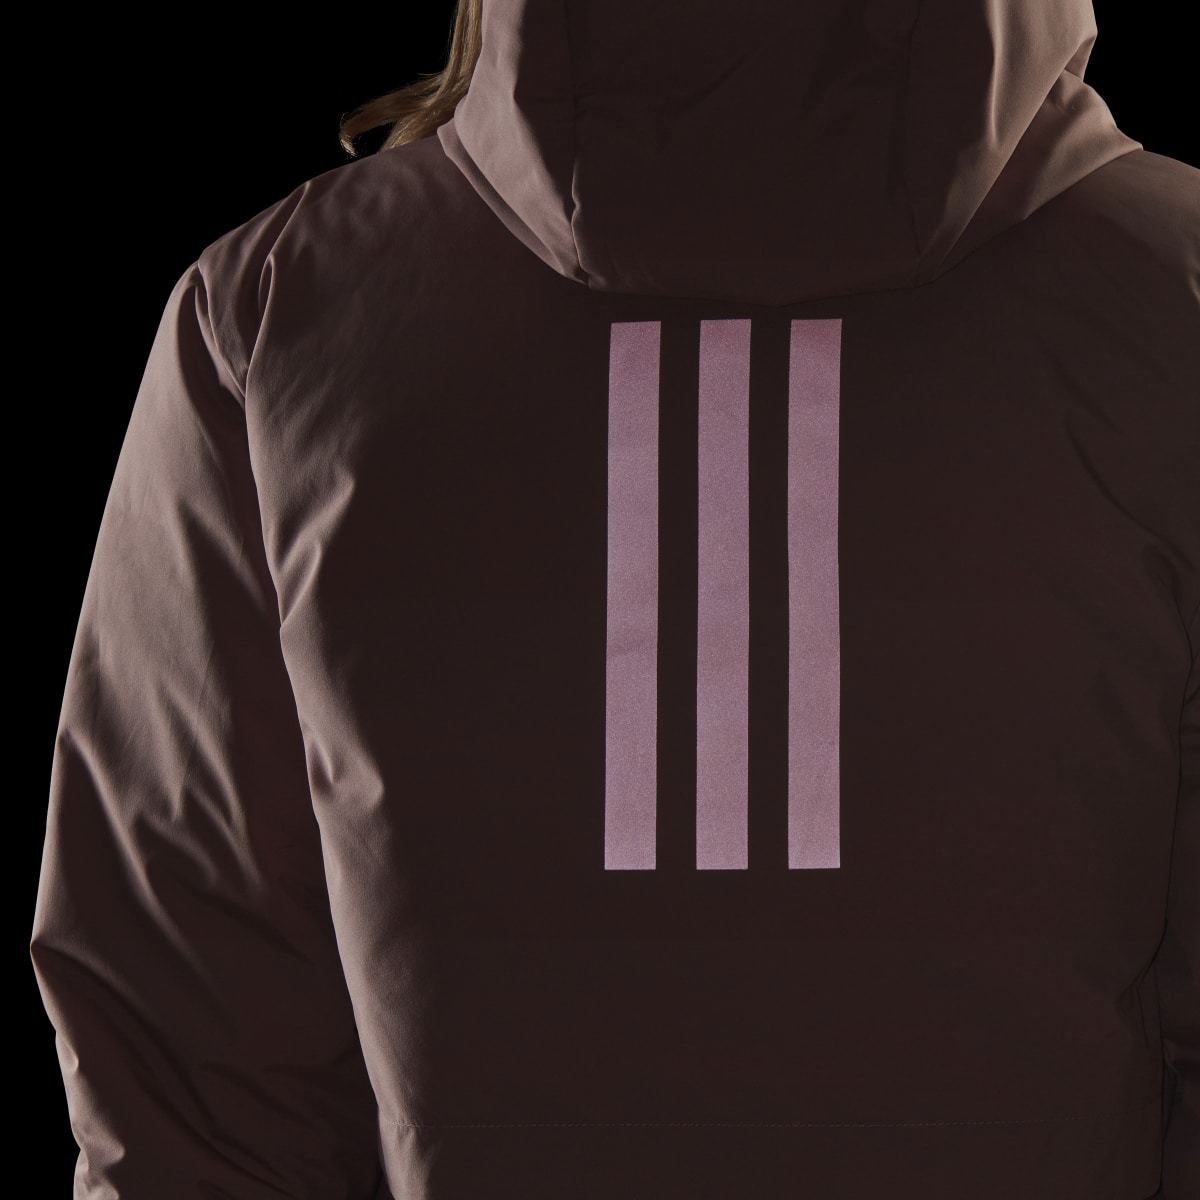 Adidas Traveer COLD.RDY Jacket. 7